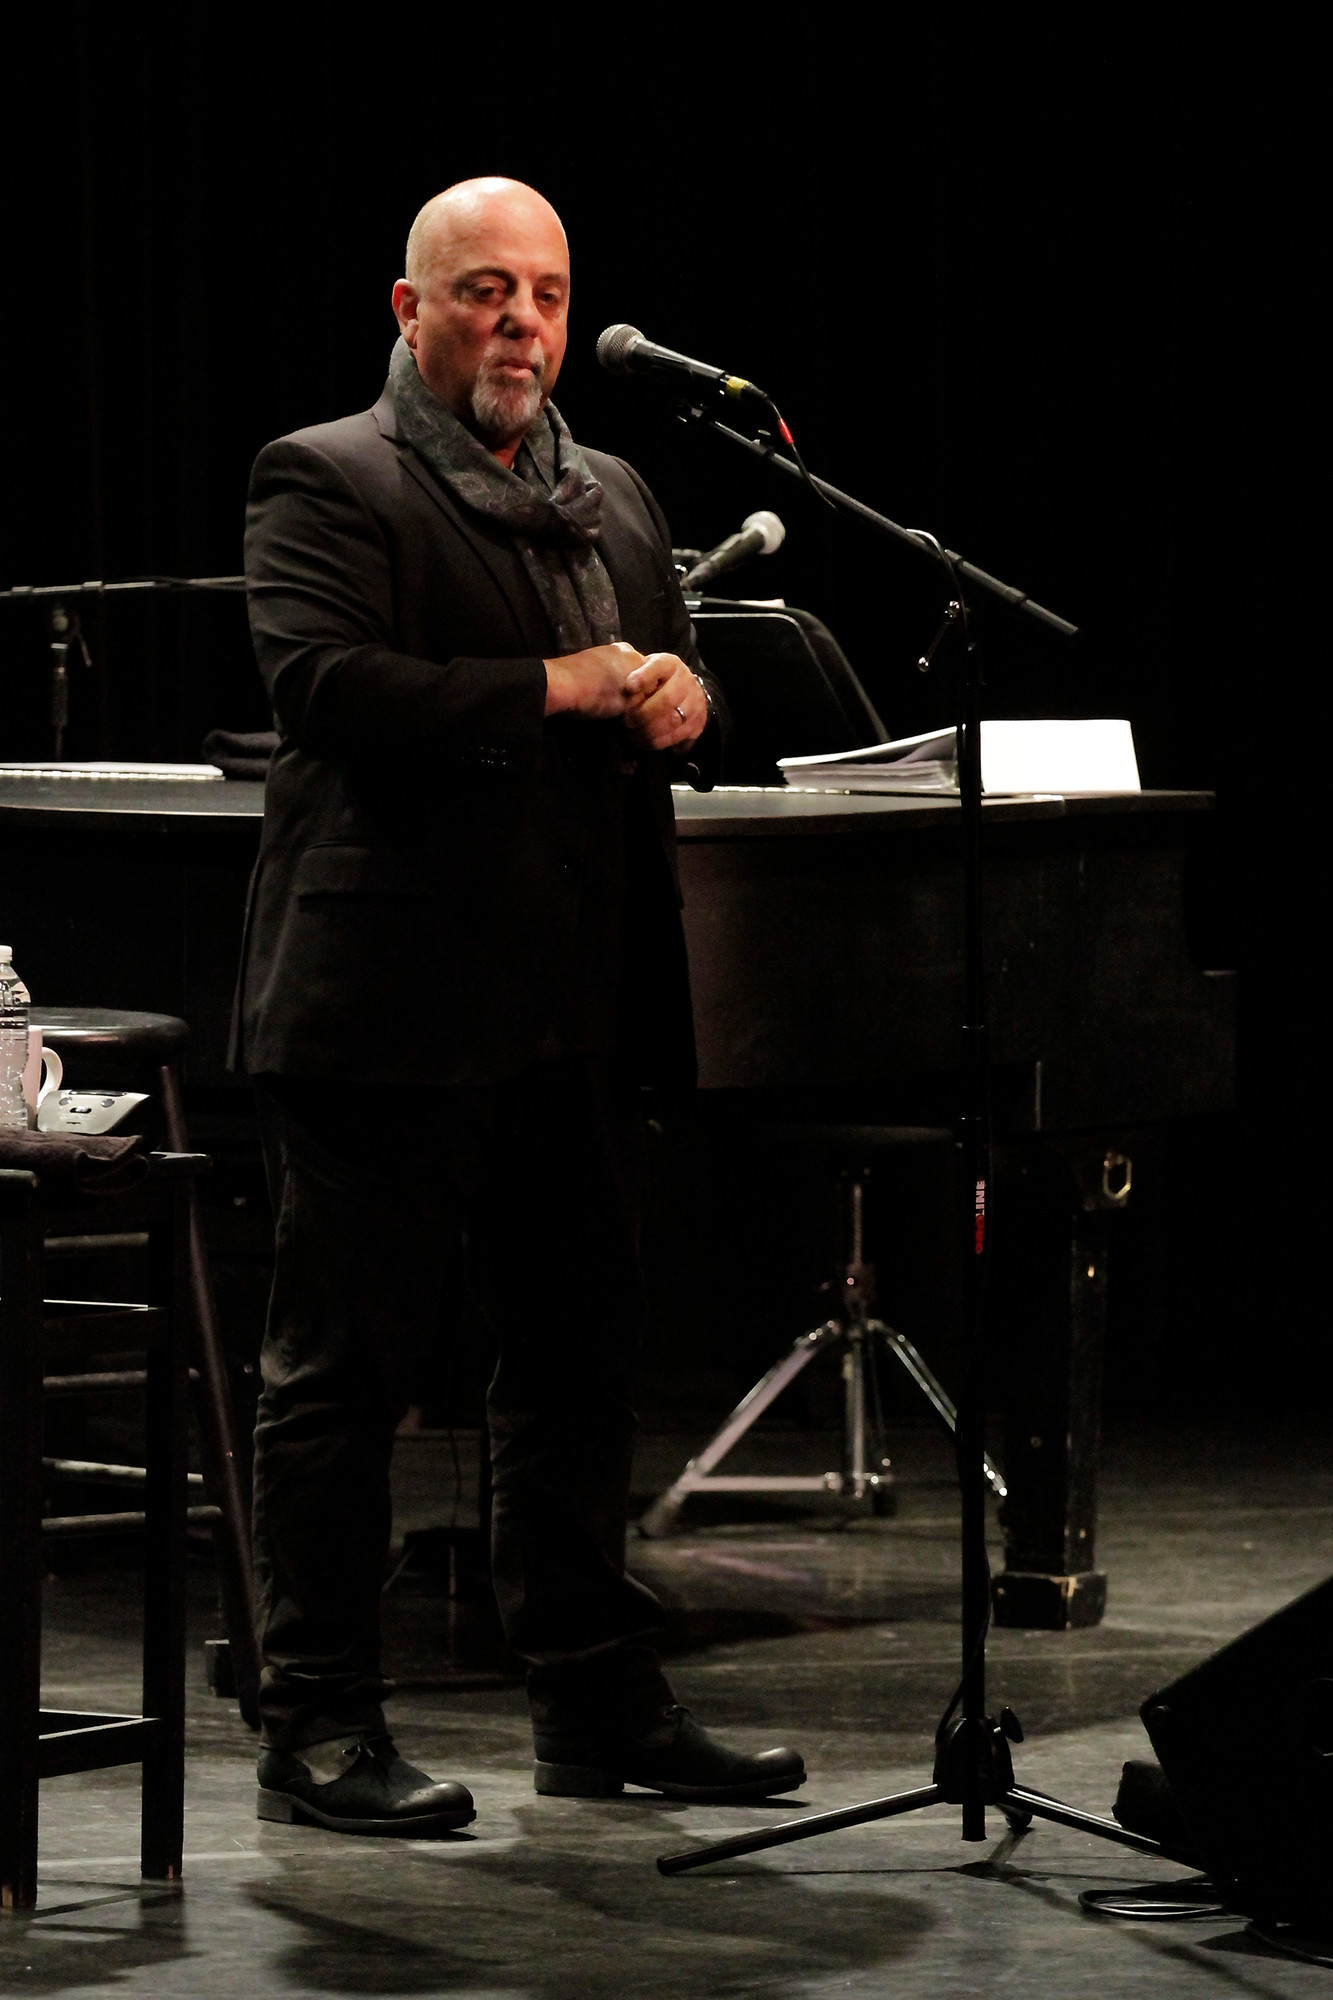 Billy Joel led a “master class” for students on Monday at the Tilles Center for the Performing Arts at LIU Post. Joel pledged a $1 million donation to LIHSA recently and is working with the school to help increase enrollment through publicity.